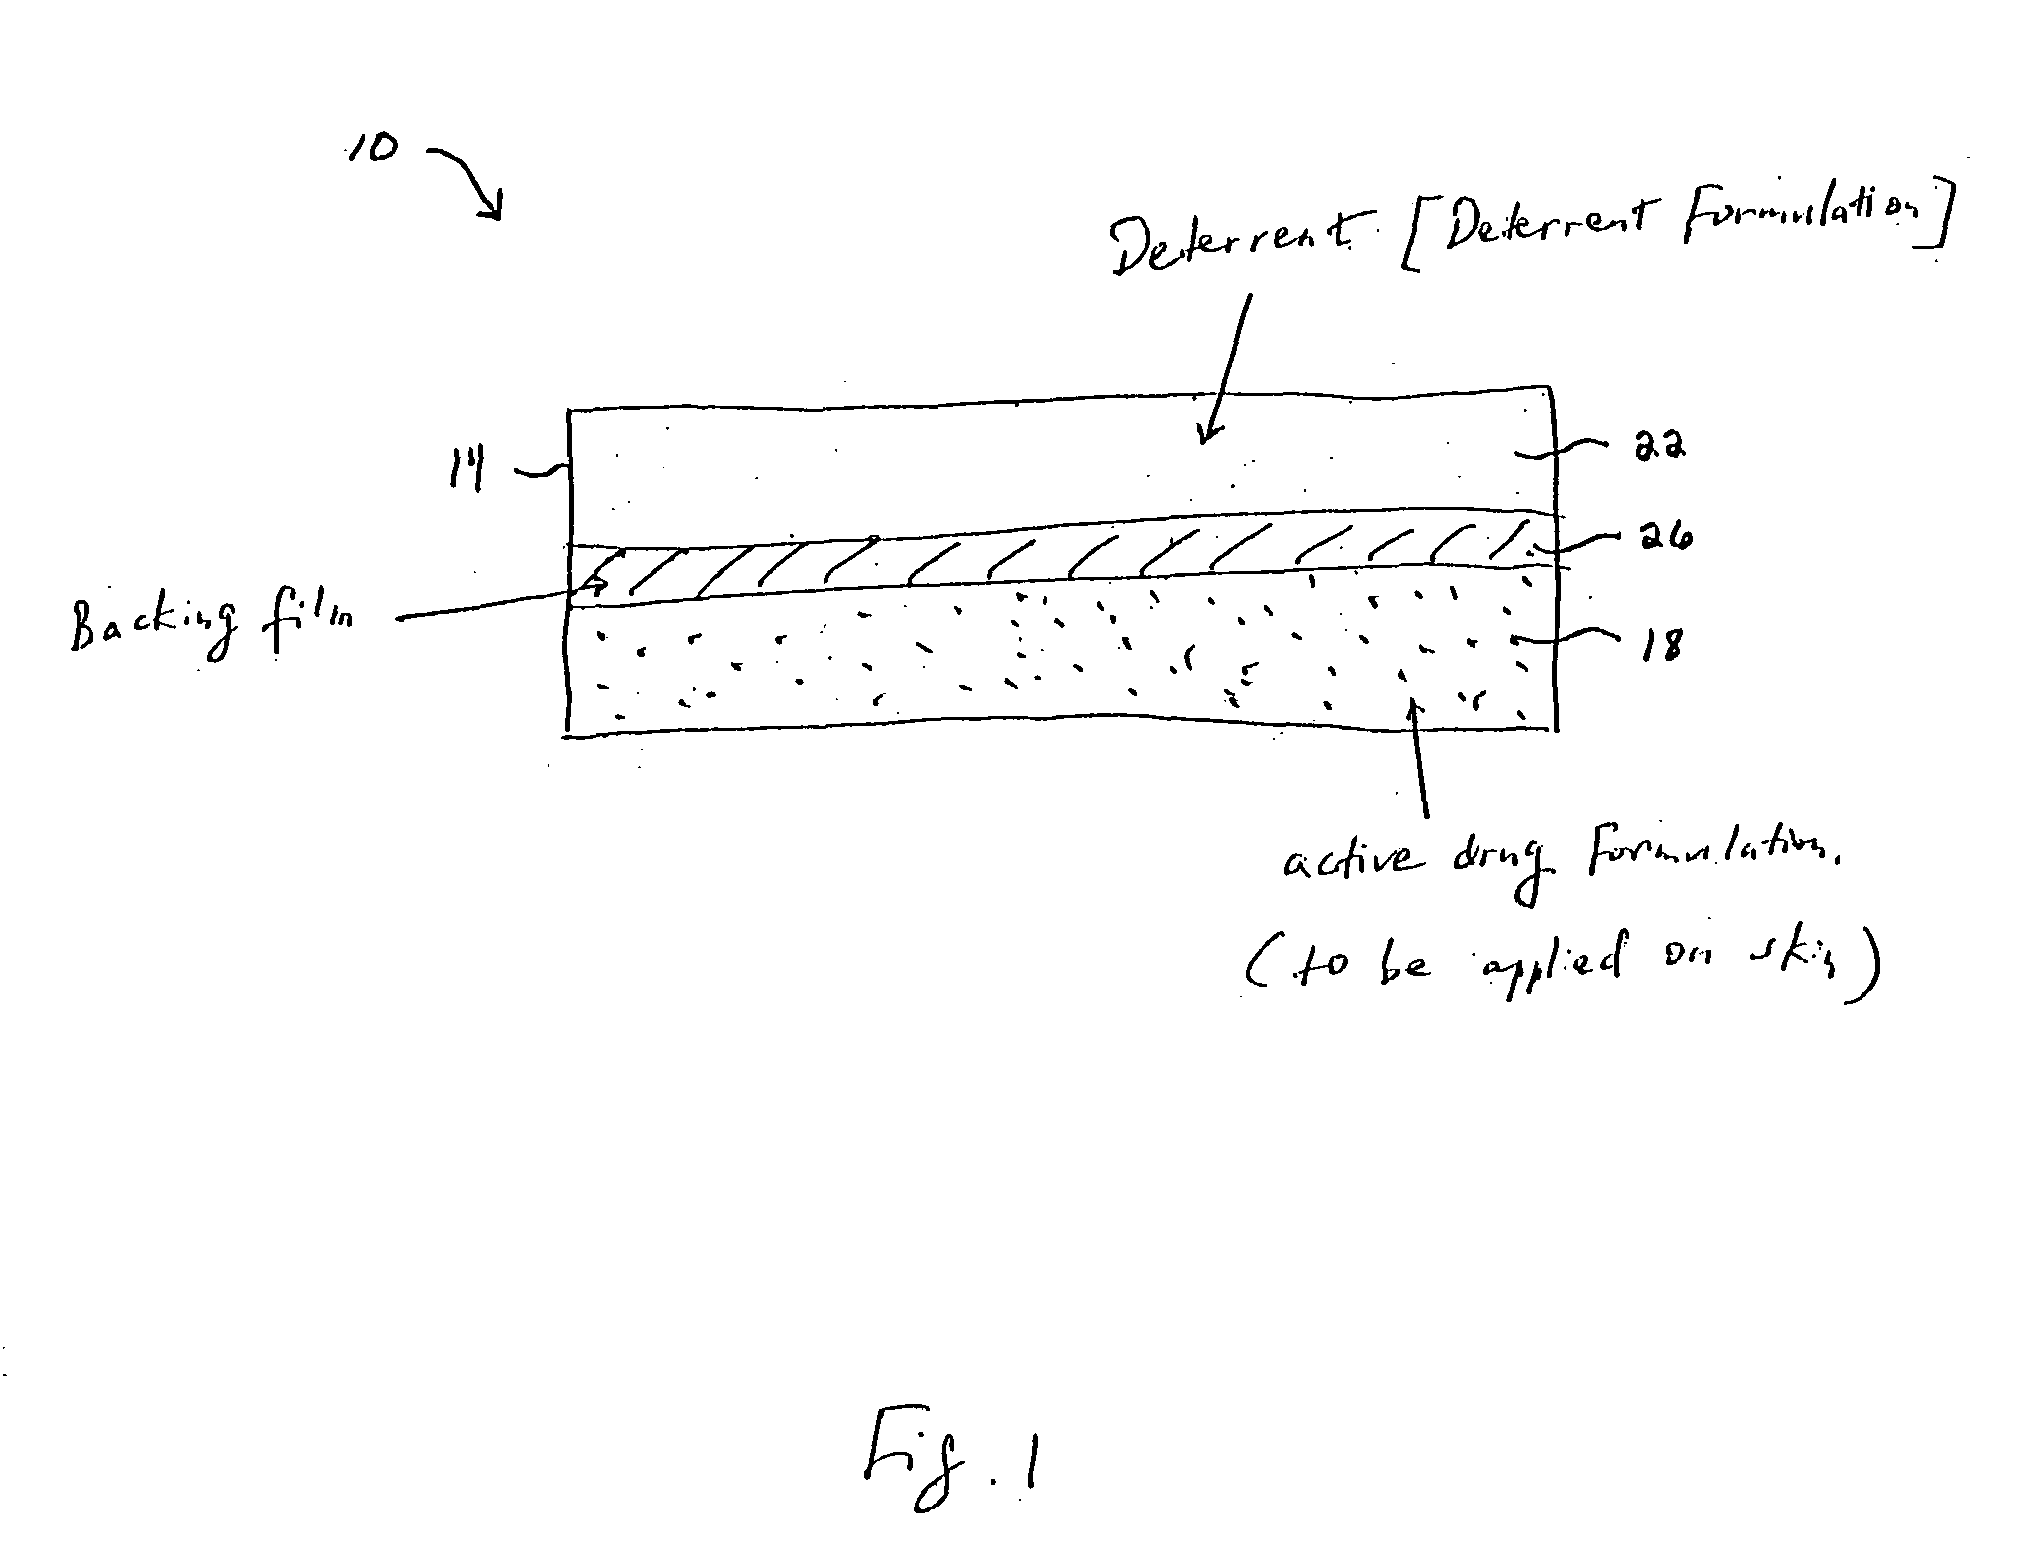 Methods and apparatus for transdermal delivery of abusable drugs with a deterrent agent